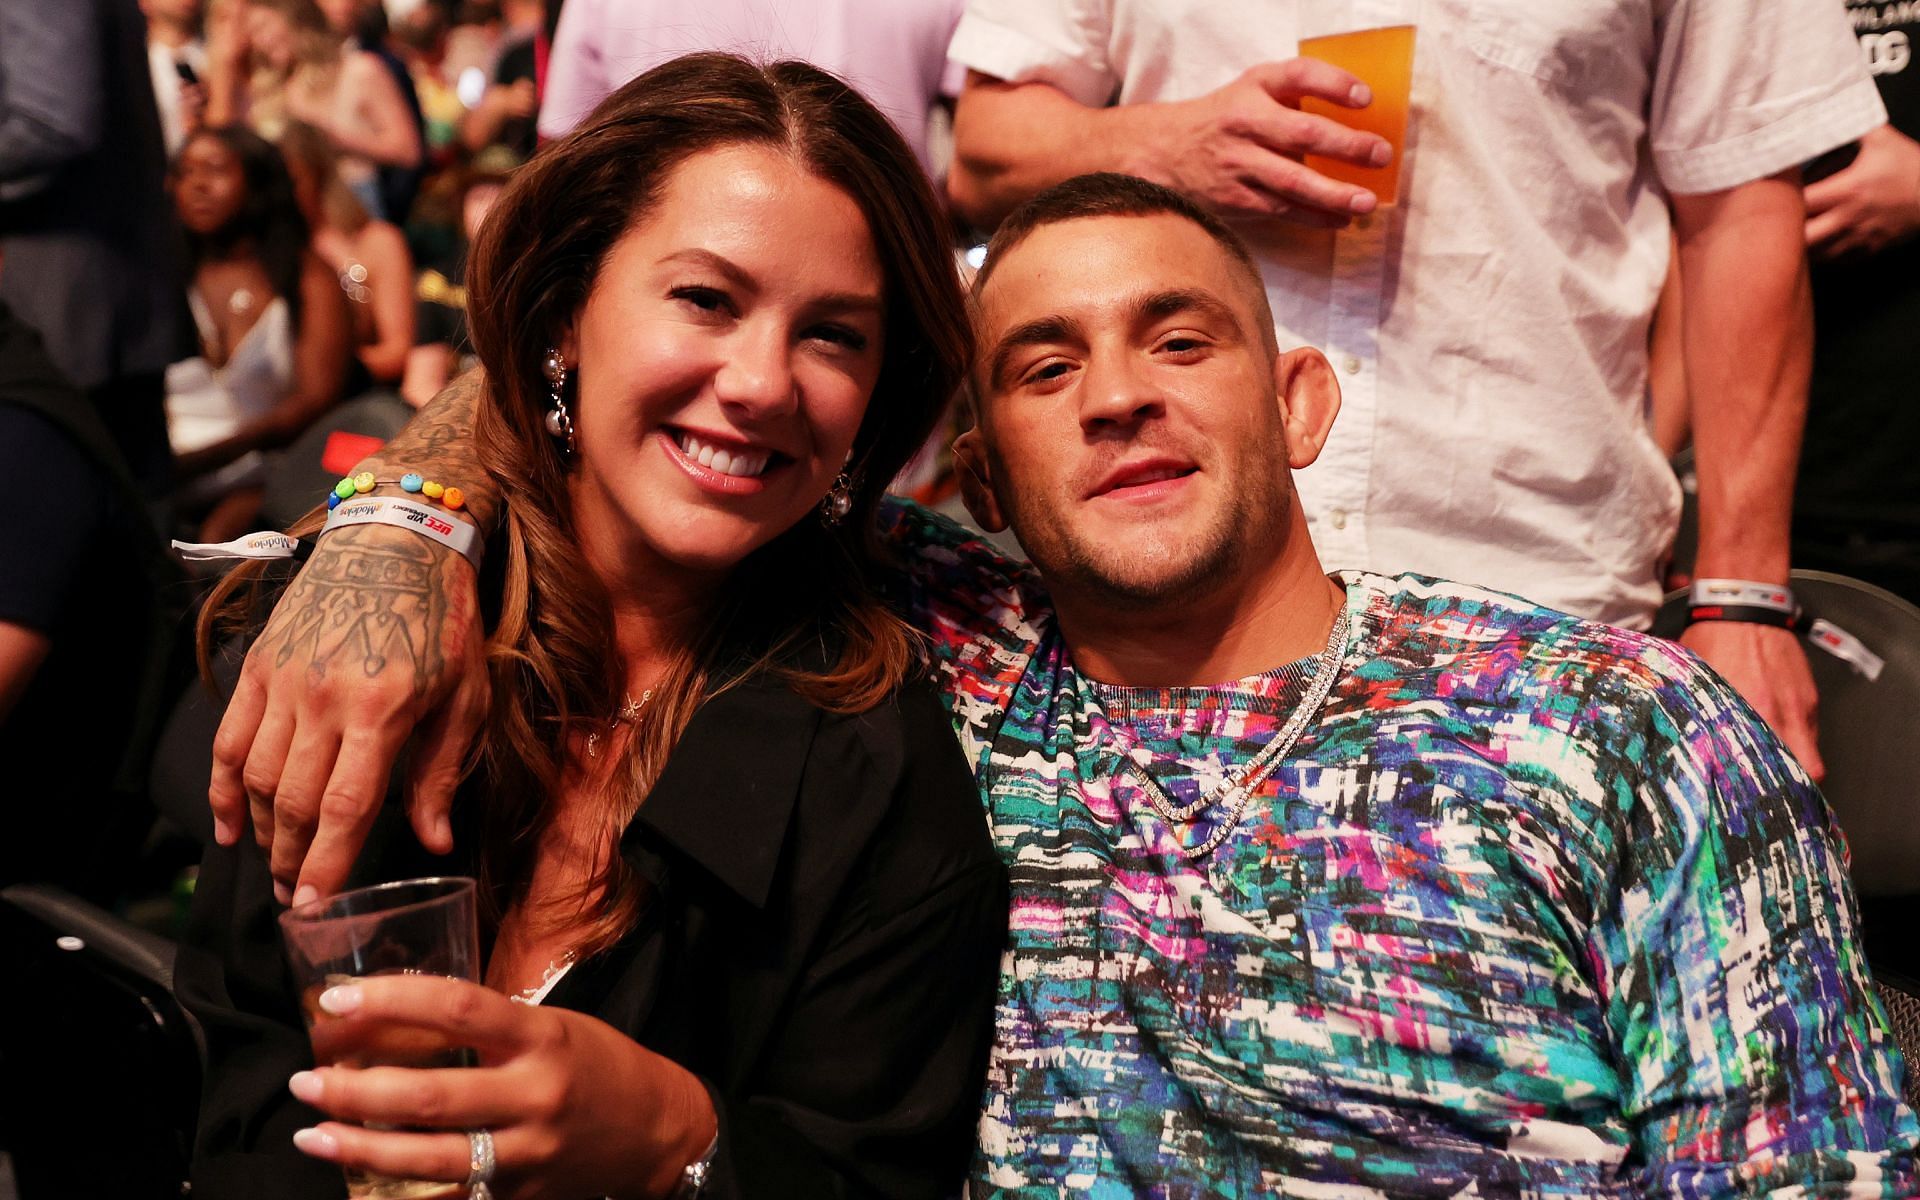 Dustin Poirier and Jolie Poirier [Image credits: Getty Images]